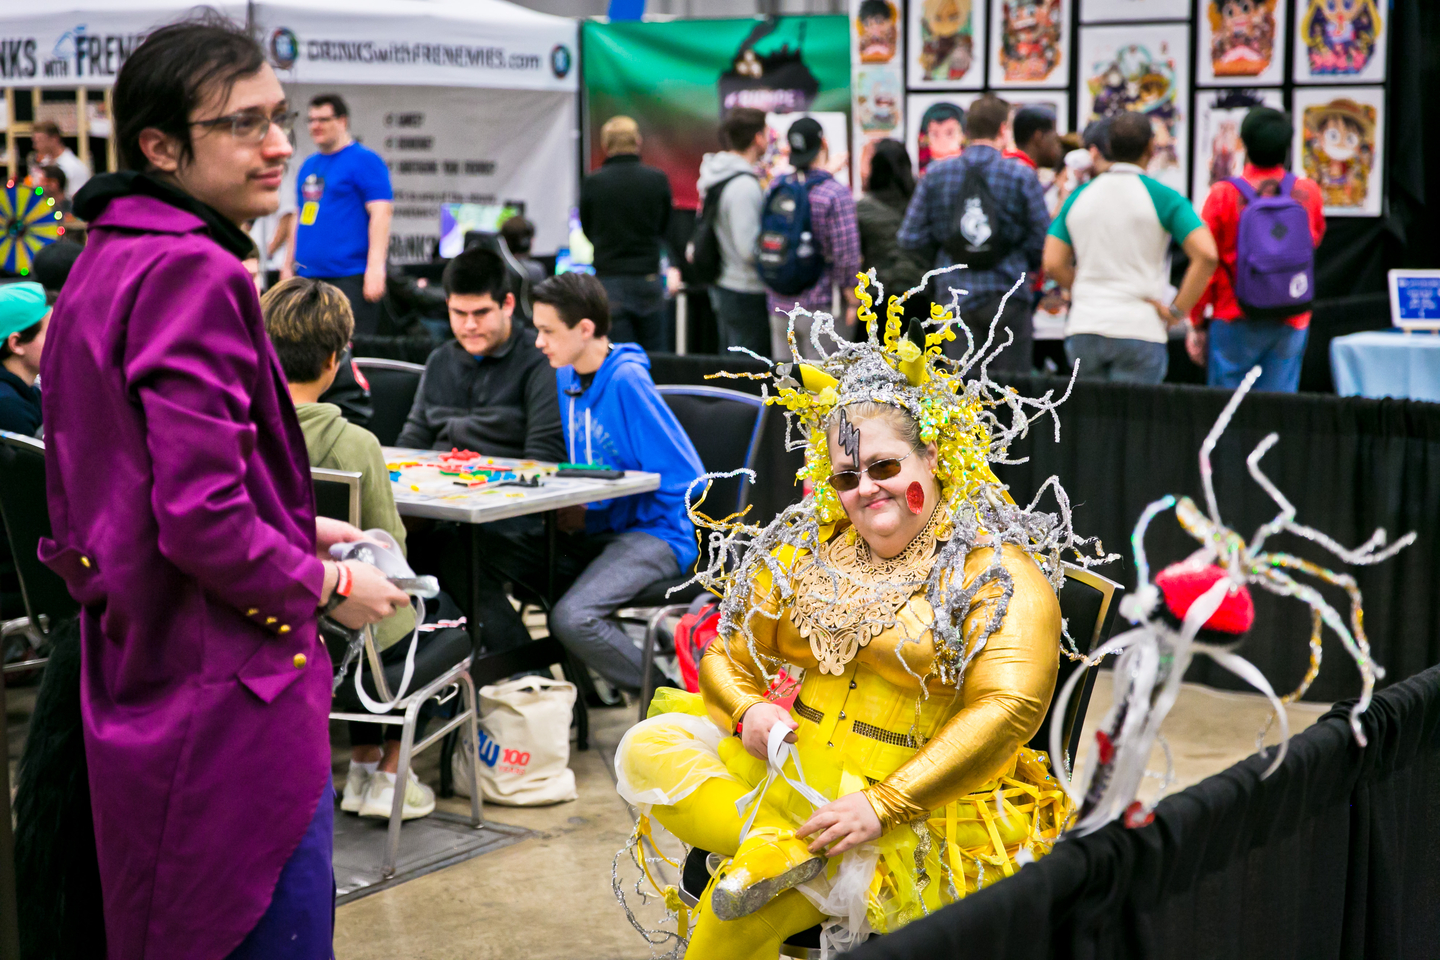 SXSW Gaming Expo – Photo by Travis Lilley